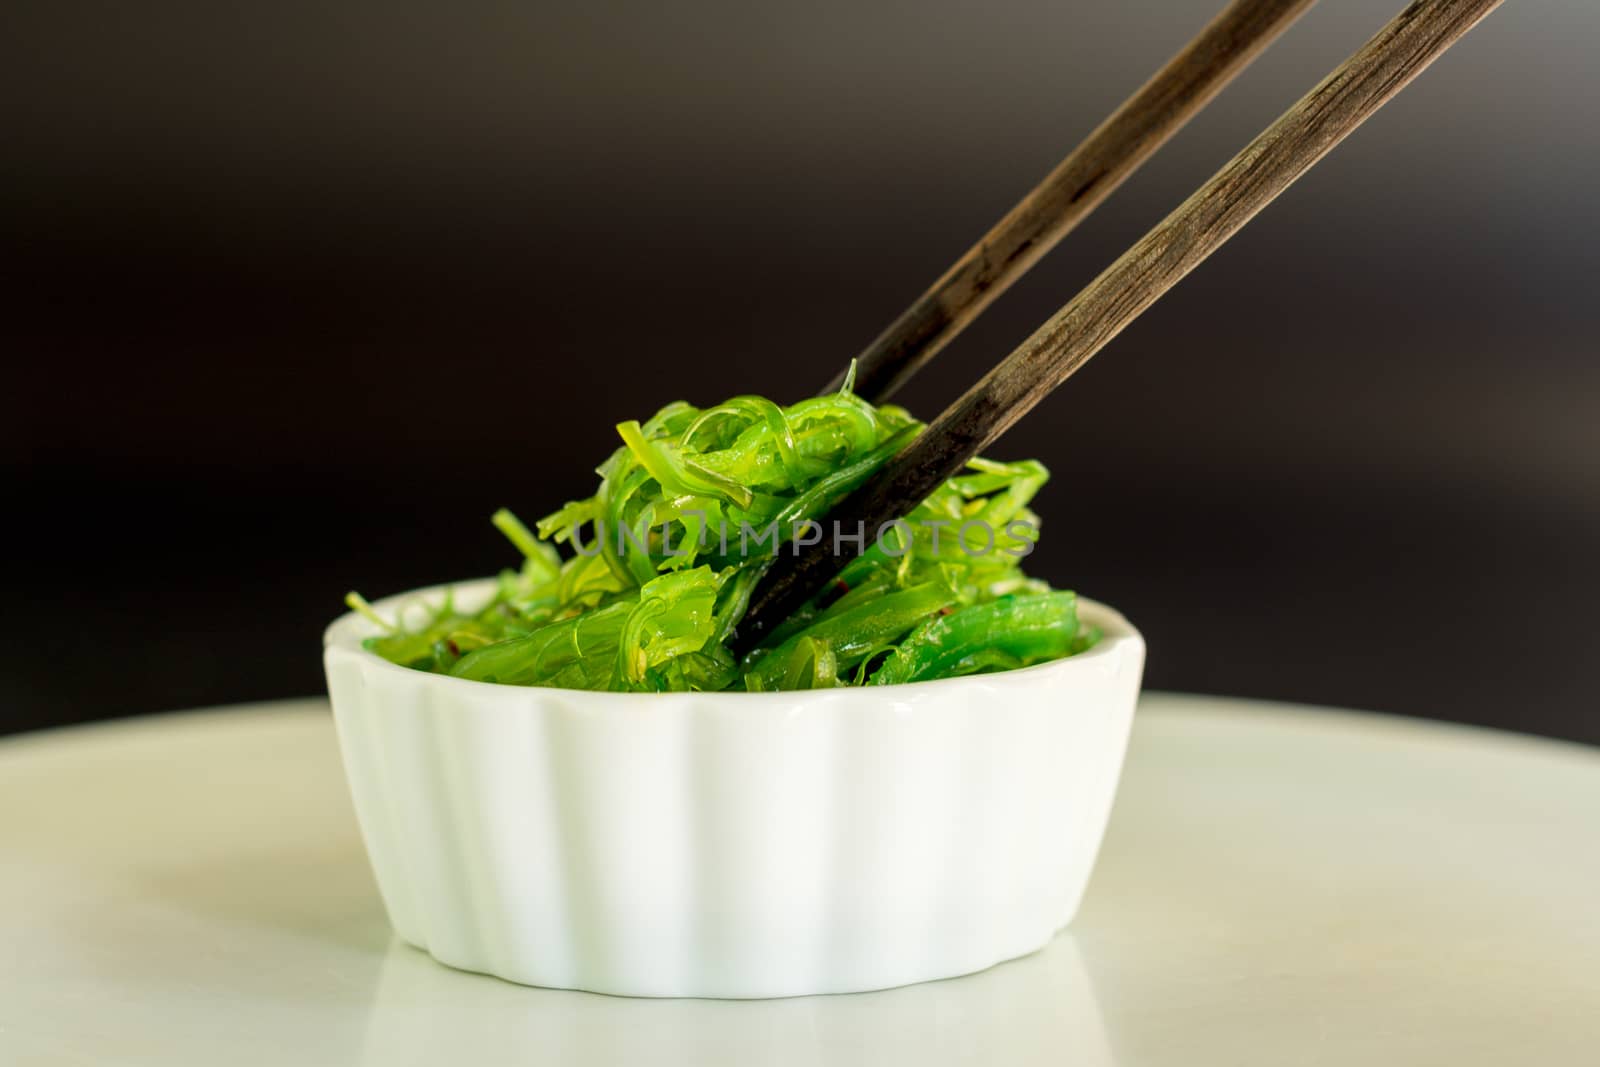 Japanese food concept. Fresh seaweed salad with sesame seeds in white bowl with chopstick on black background.